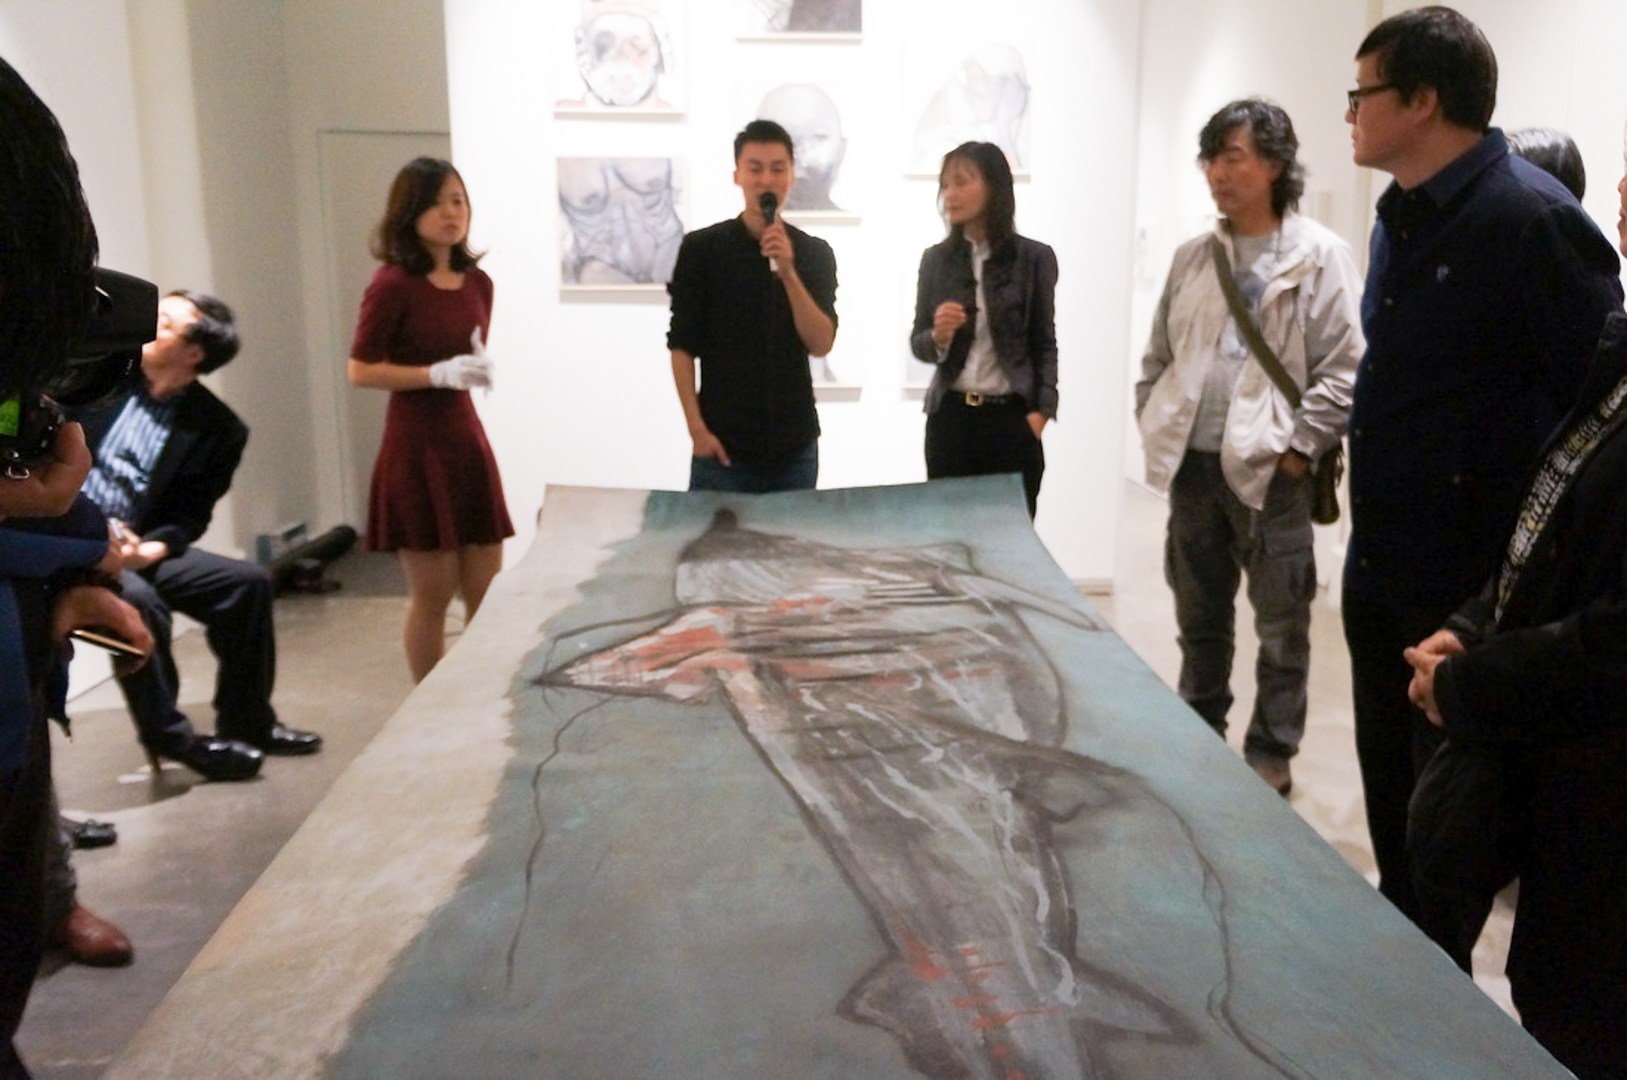 nk Instinct, Sun Ziyao's first solo exhibition in Australia was opened by Dr Richard Wu Co-curated by Yeqin Zuo and Guan Wei